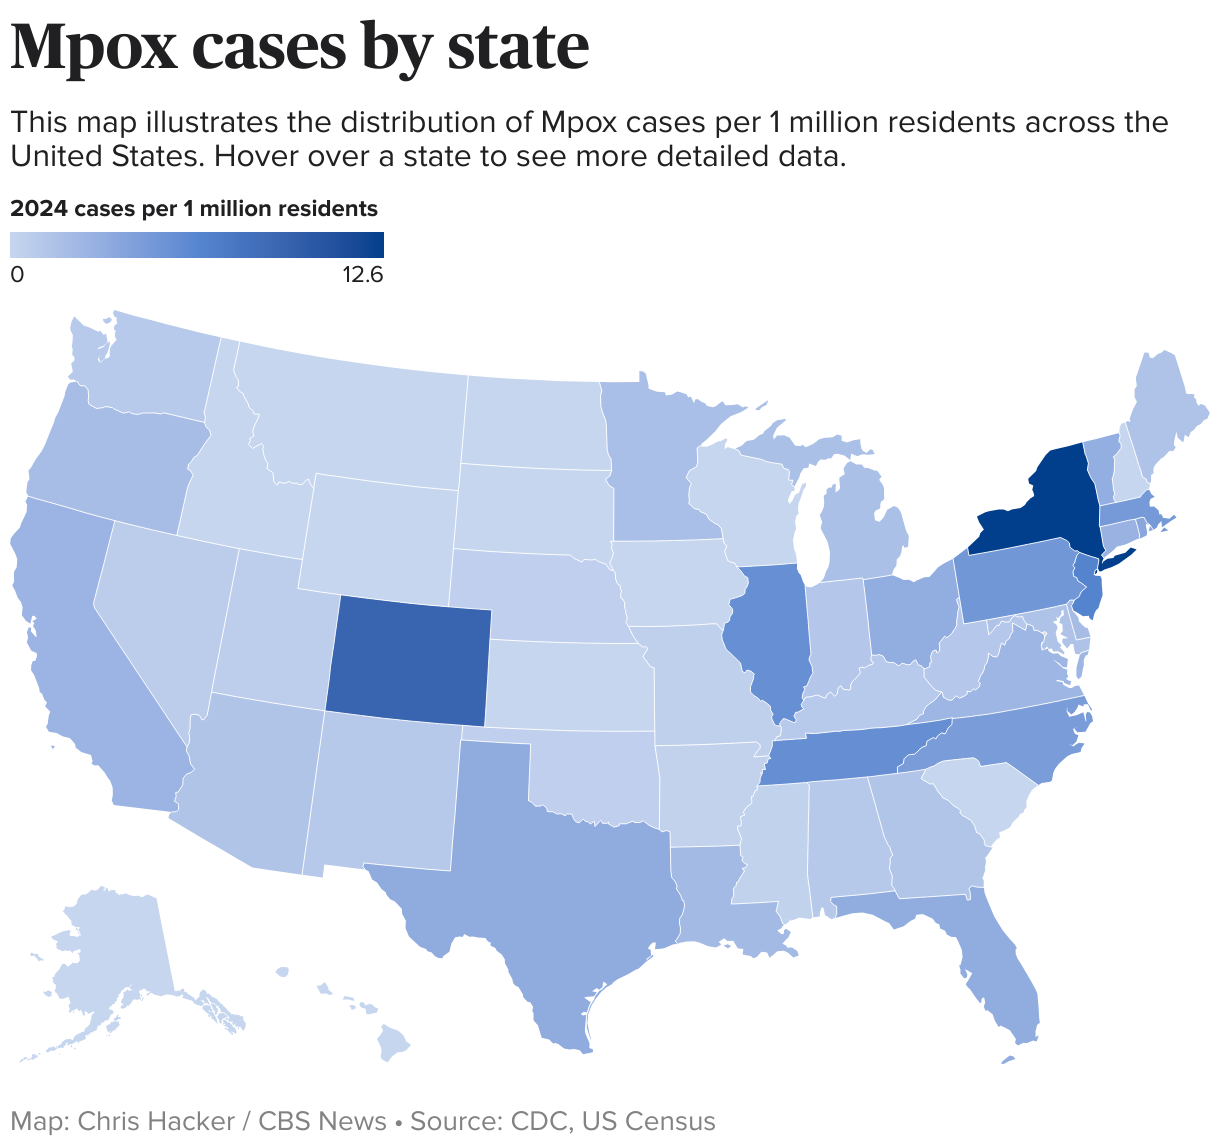 U.S map showing the distribution of Mpox cases per 1 million residents.